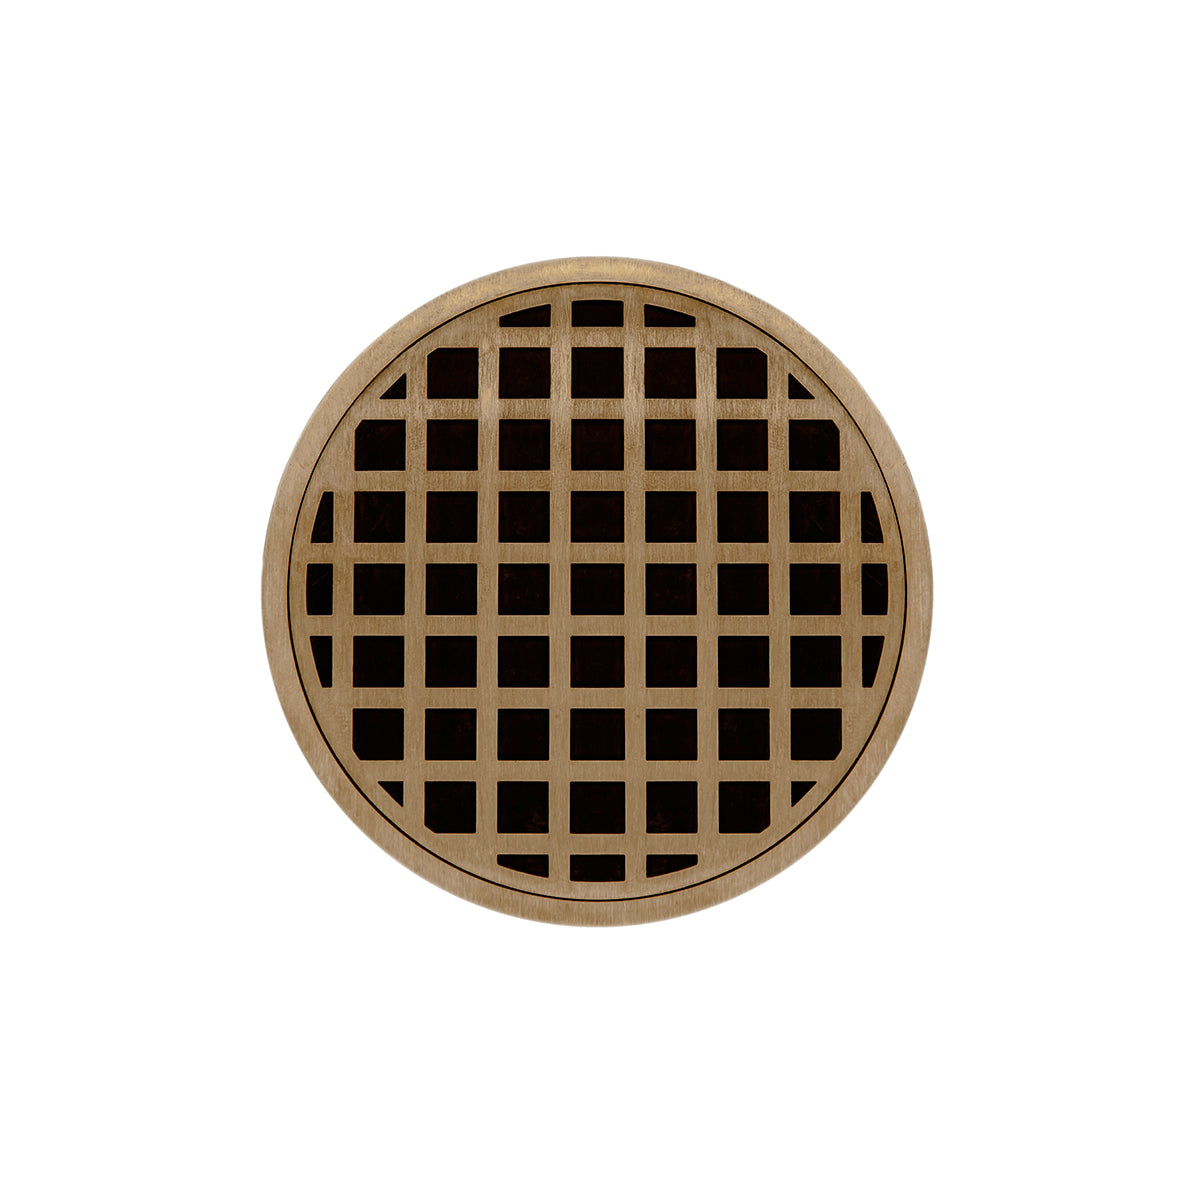 Infinity Drain 5" Round RQD 5 High Flow Premium Center Drain Kit with Squares Pattern Decorative Plate with Cast Iron Drain Body, 3" No-Hub Outlet